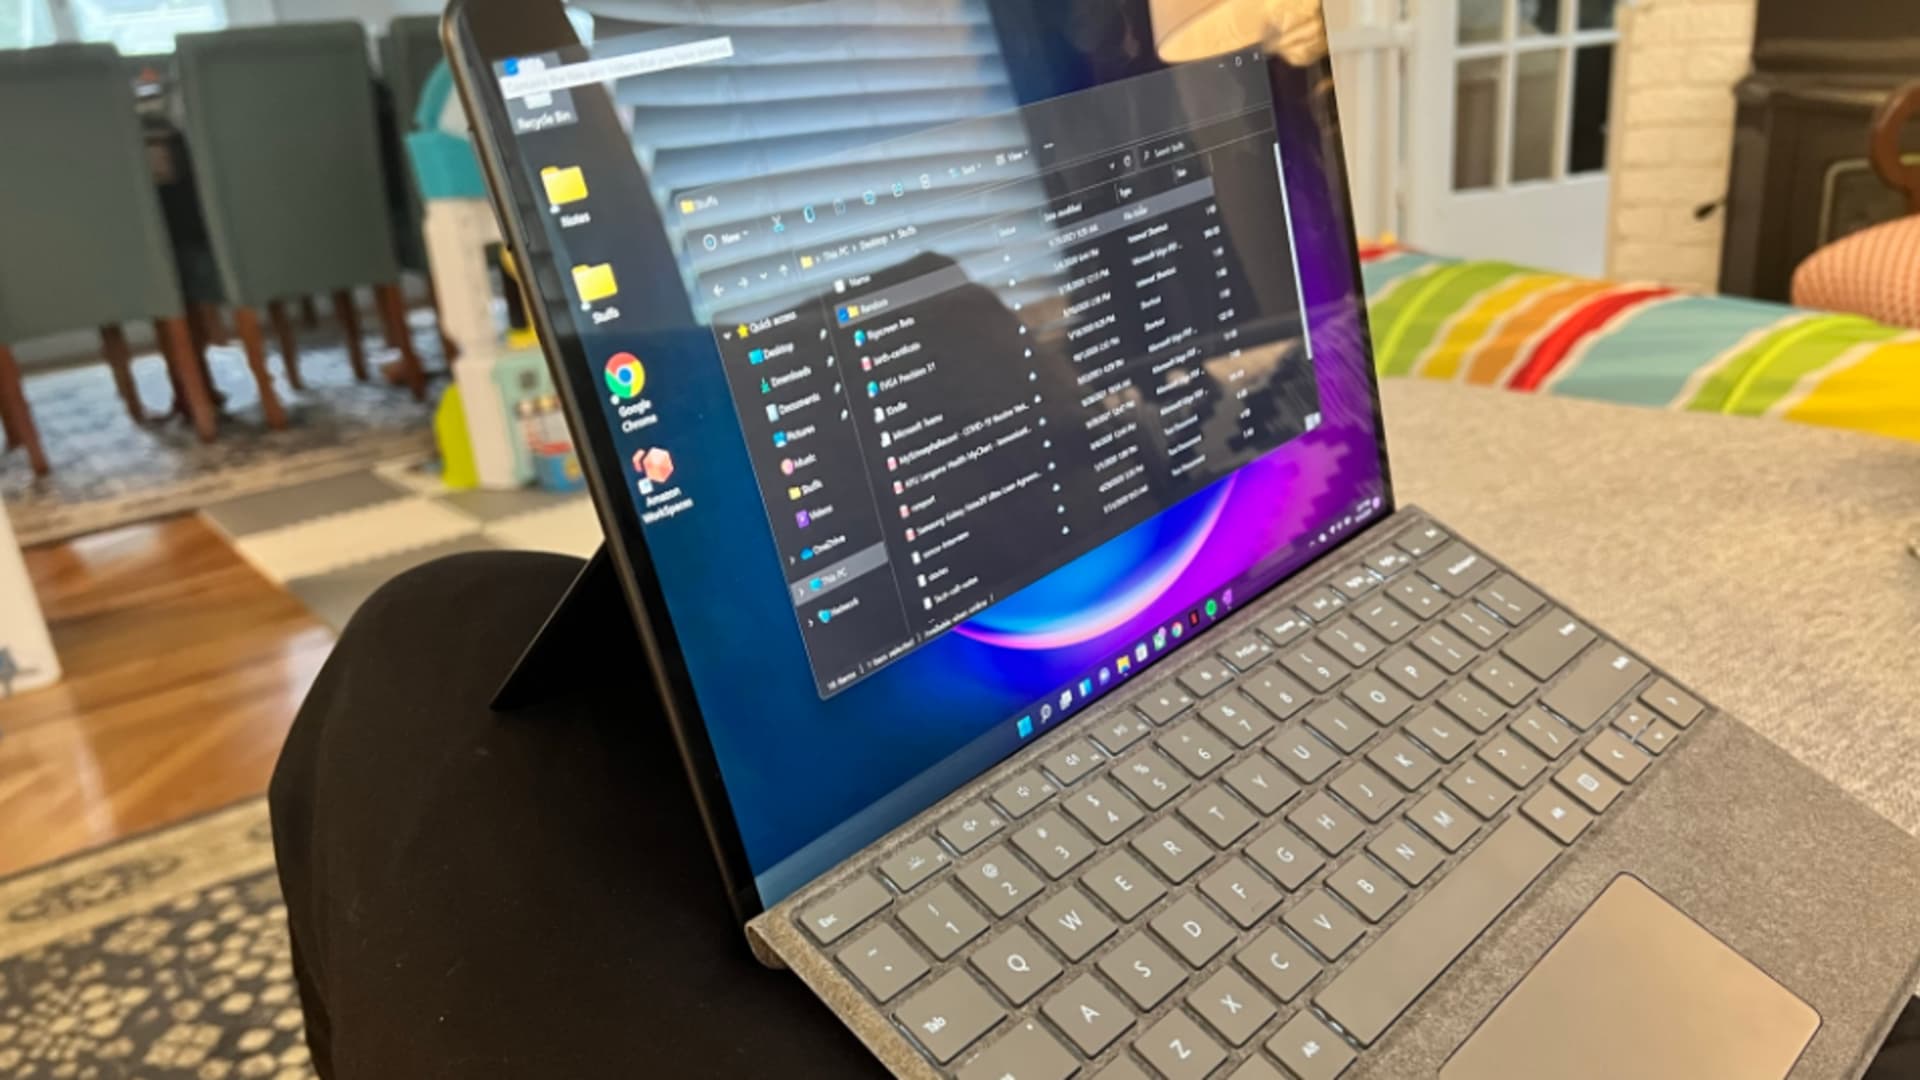 Balancing the Surface Pro 8 on my lap.